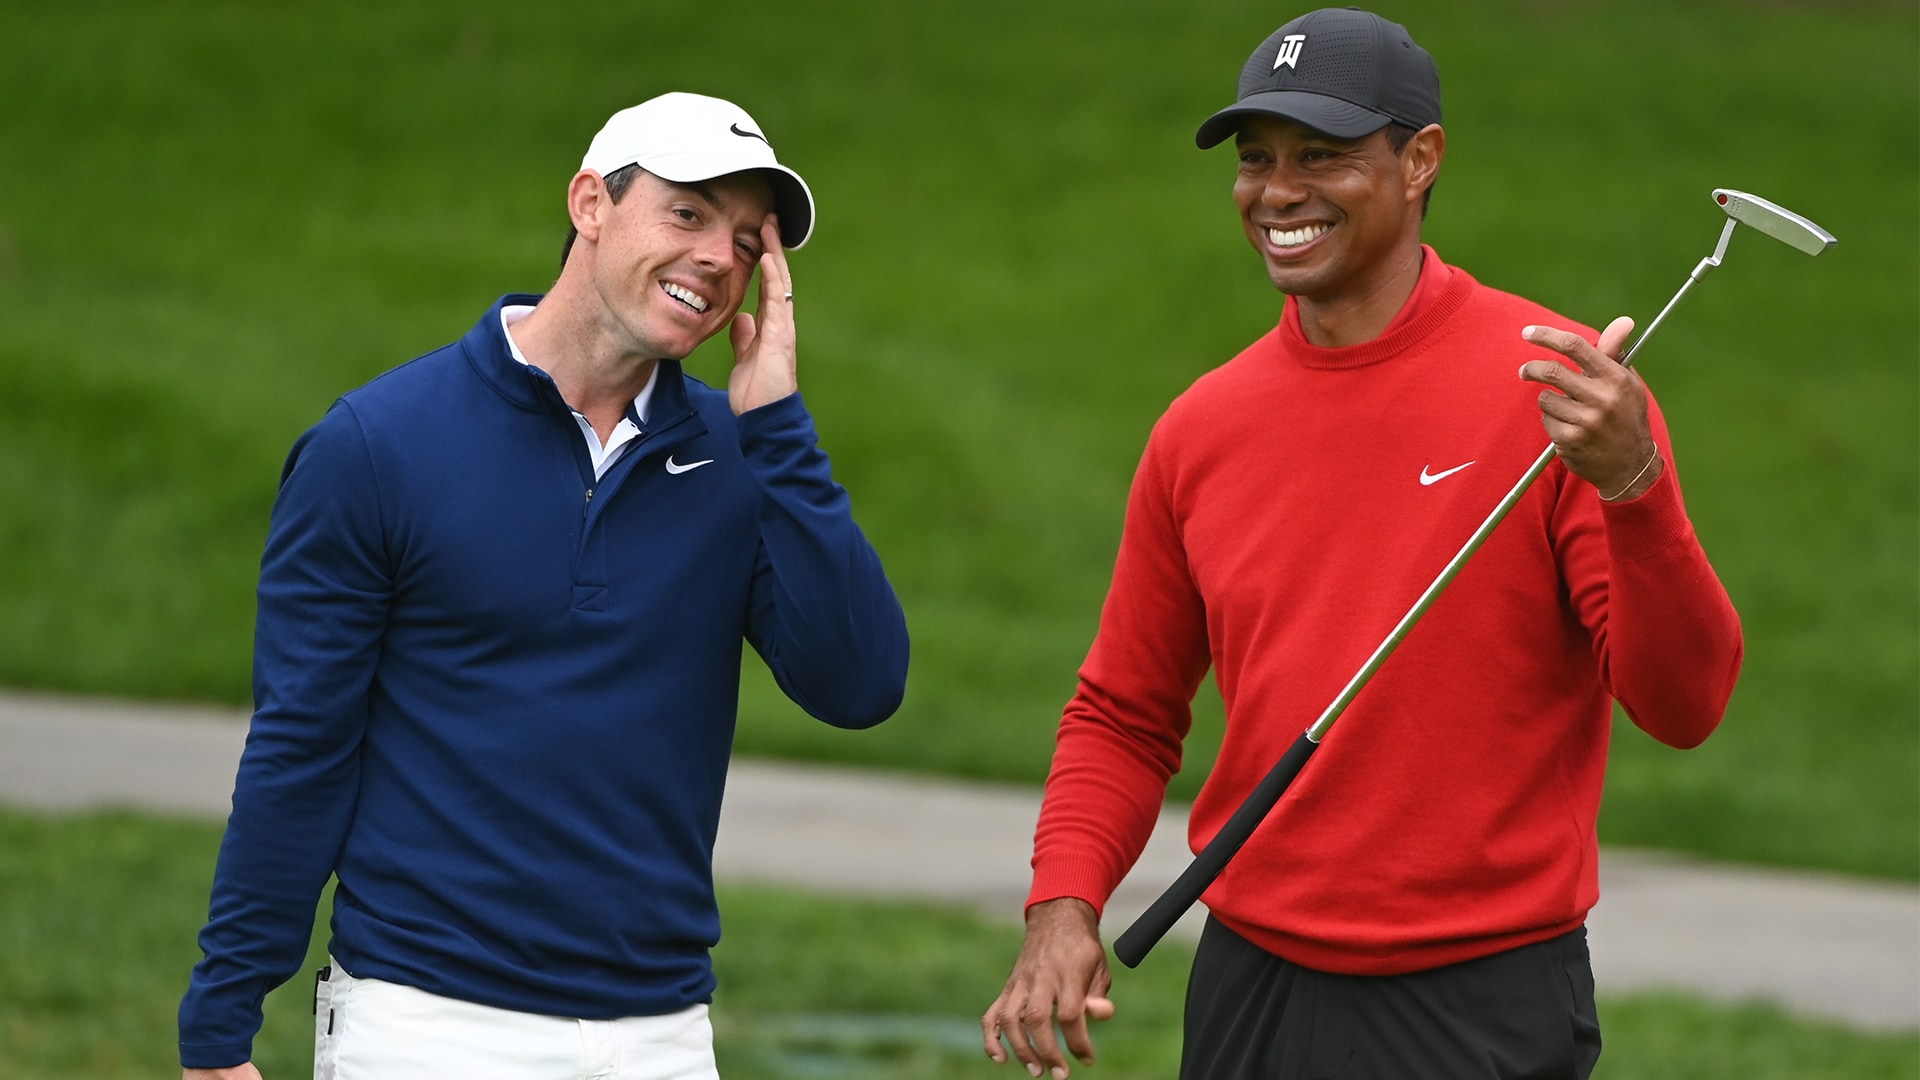 Rory and Tiger smiling together.